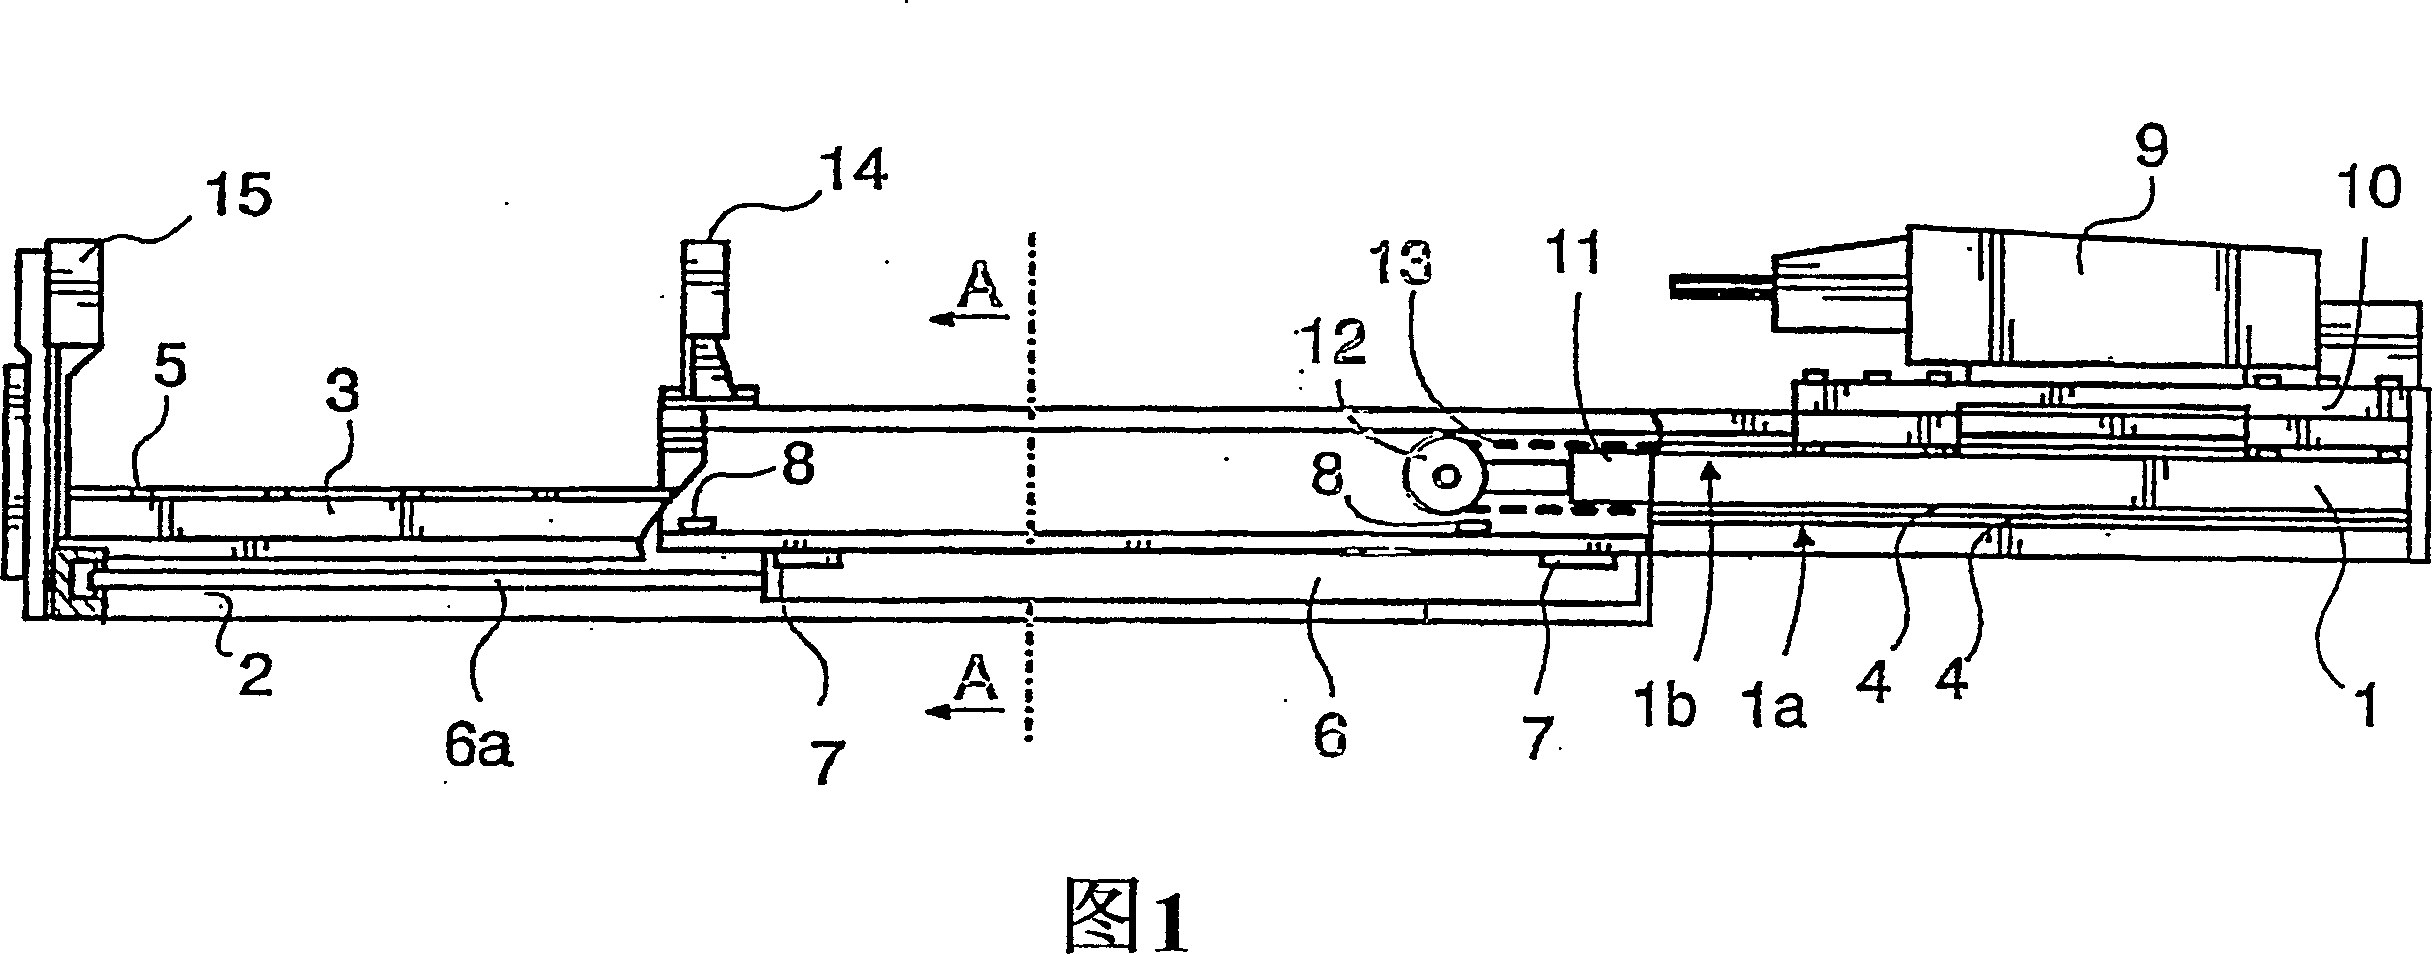 Telescopic feed beam for rock drill and method of measuring rock drill travel